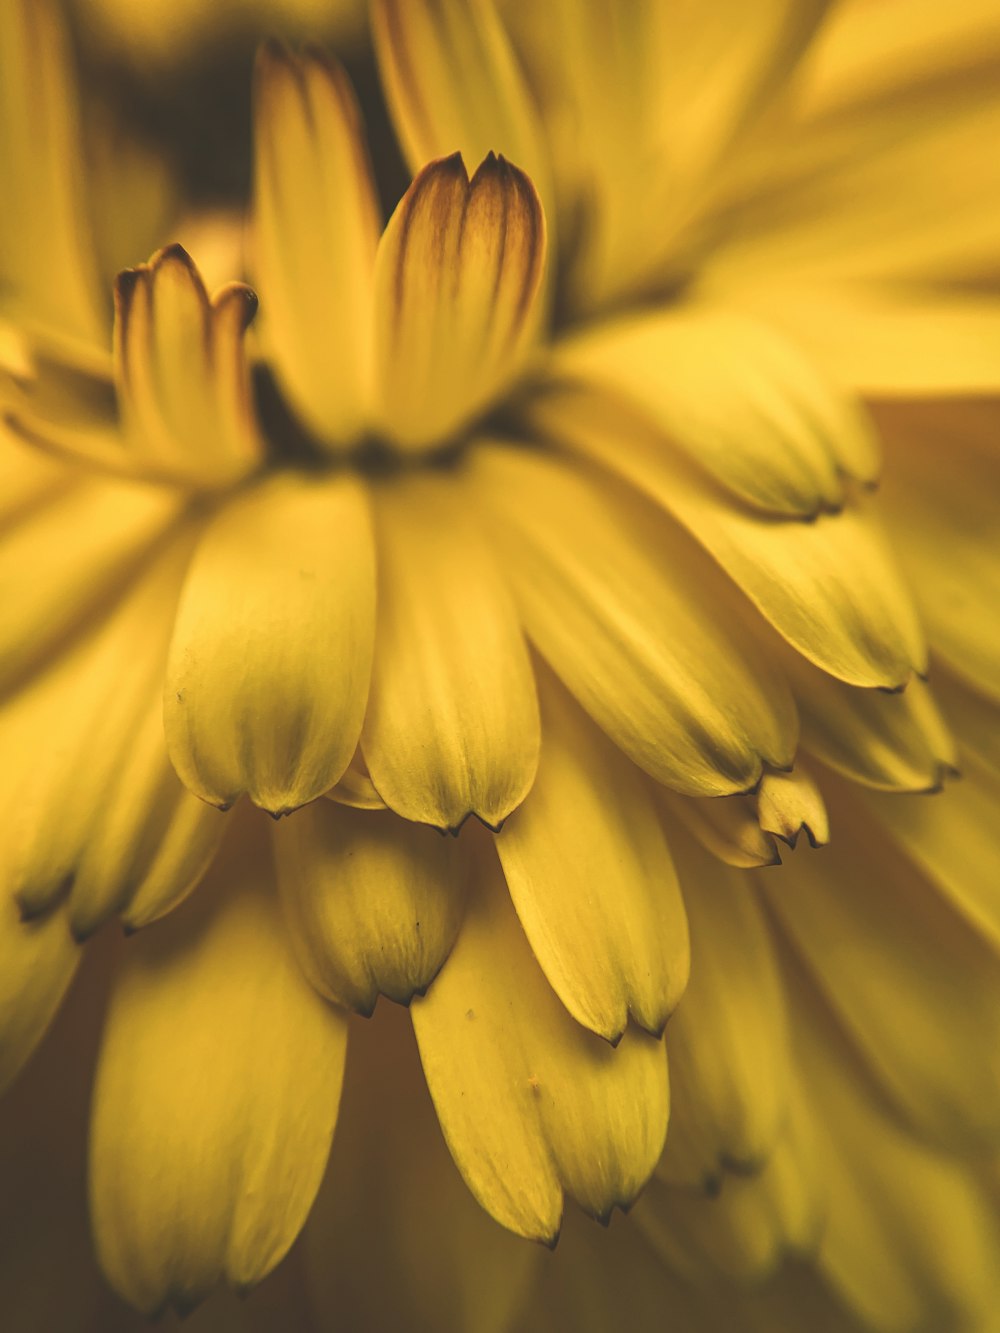 a close up of a yellow flower with many petals